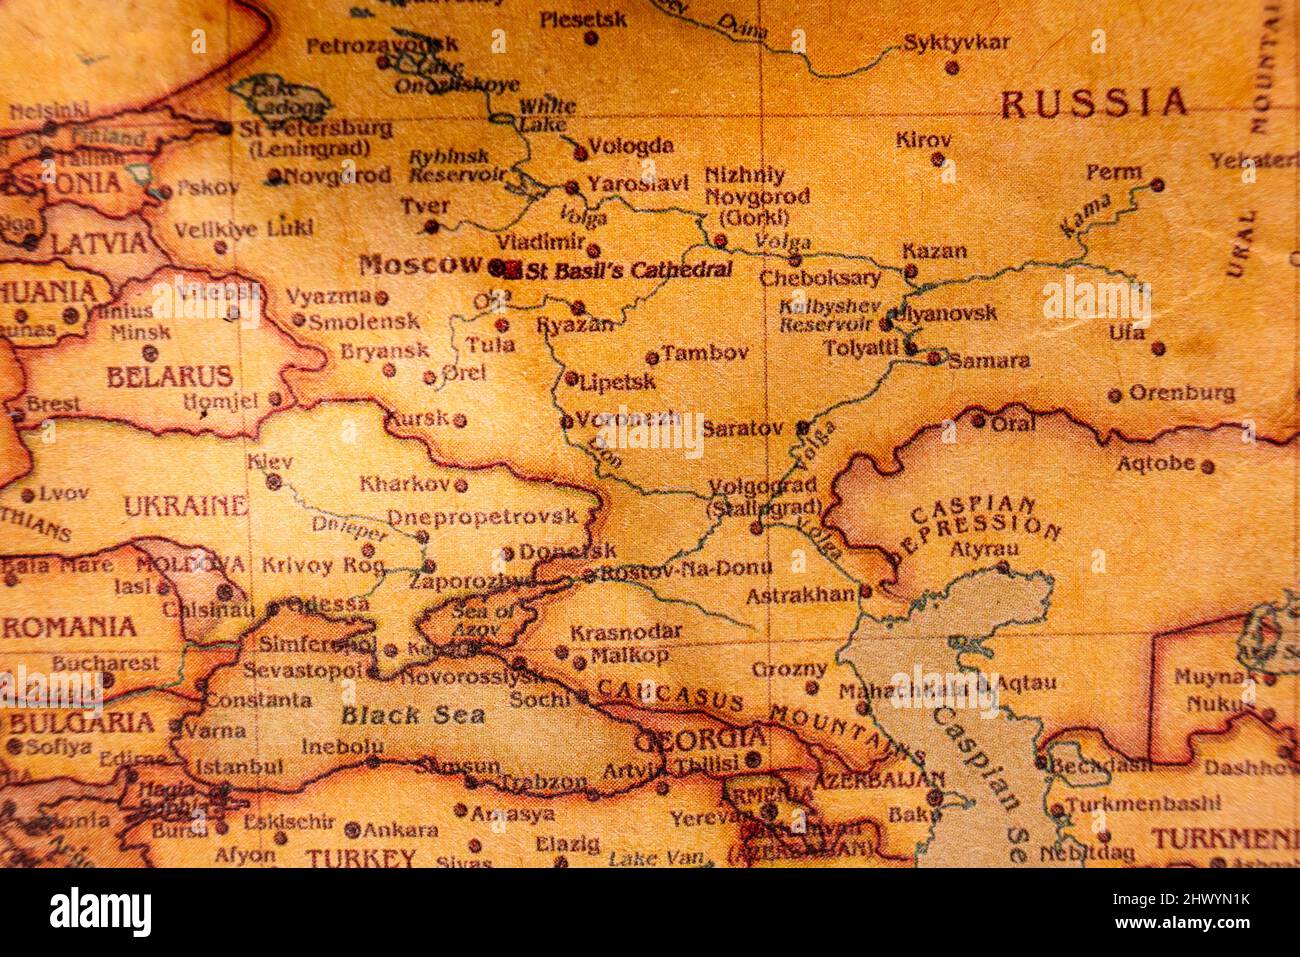 Old map of Central Europe, with Ukraine and Russia in the foreground. Stock Photo